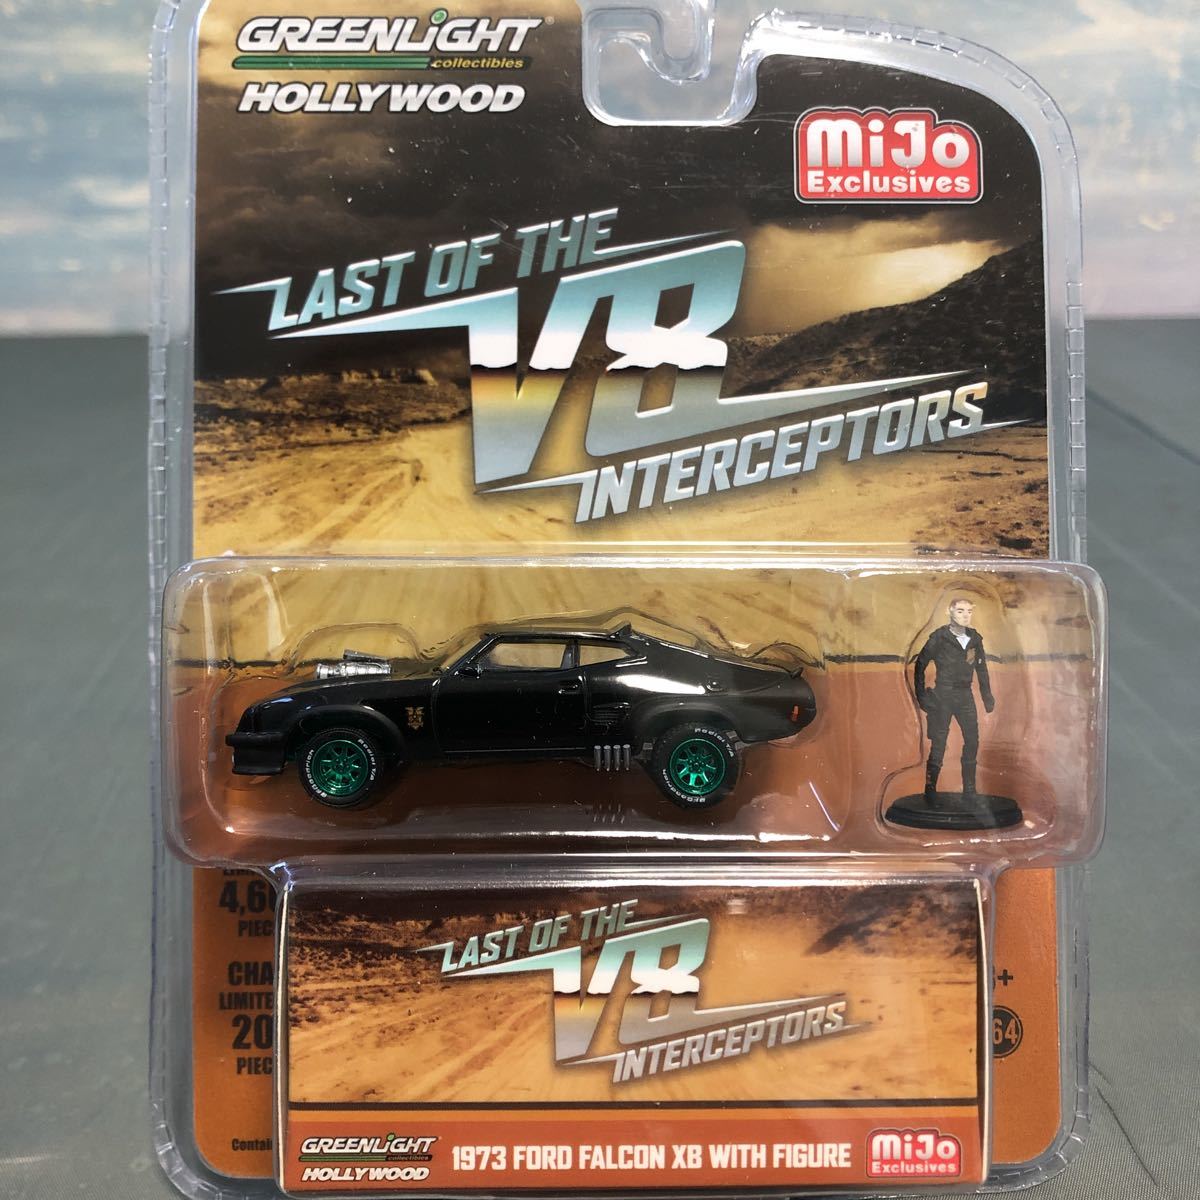 GREENLIGHT 1/64 1973 FORD FALCON XB WITH FIGURE LAST OF THE V8 INTERCEPTORS mijo Exclusives グリーンライト グリーンマシーン マシン